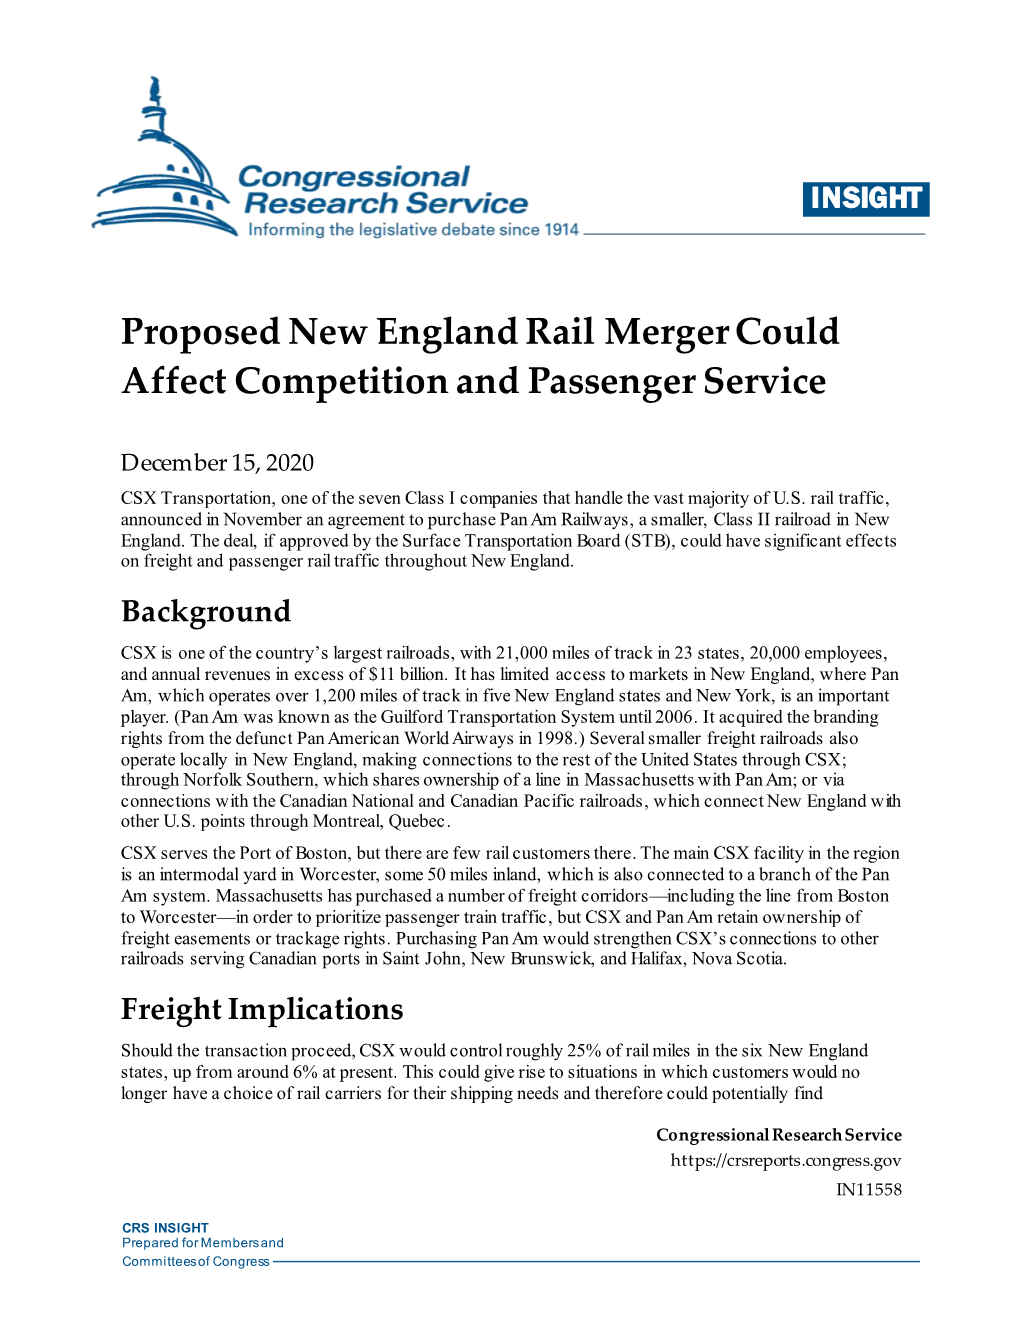 Proposed New England Rail Merger Could Affect Competition and Passenger Service